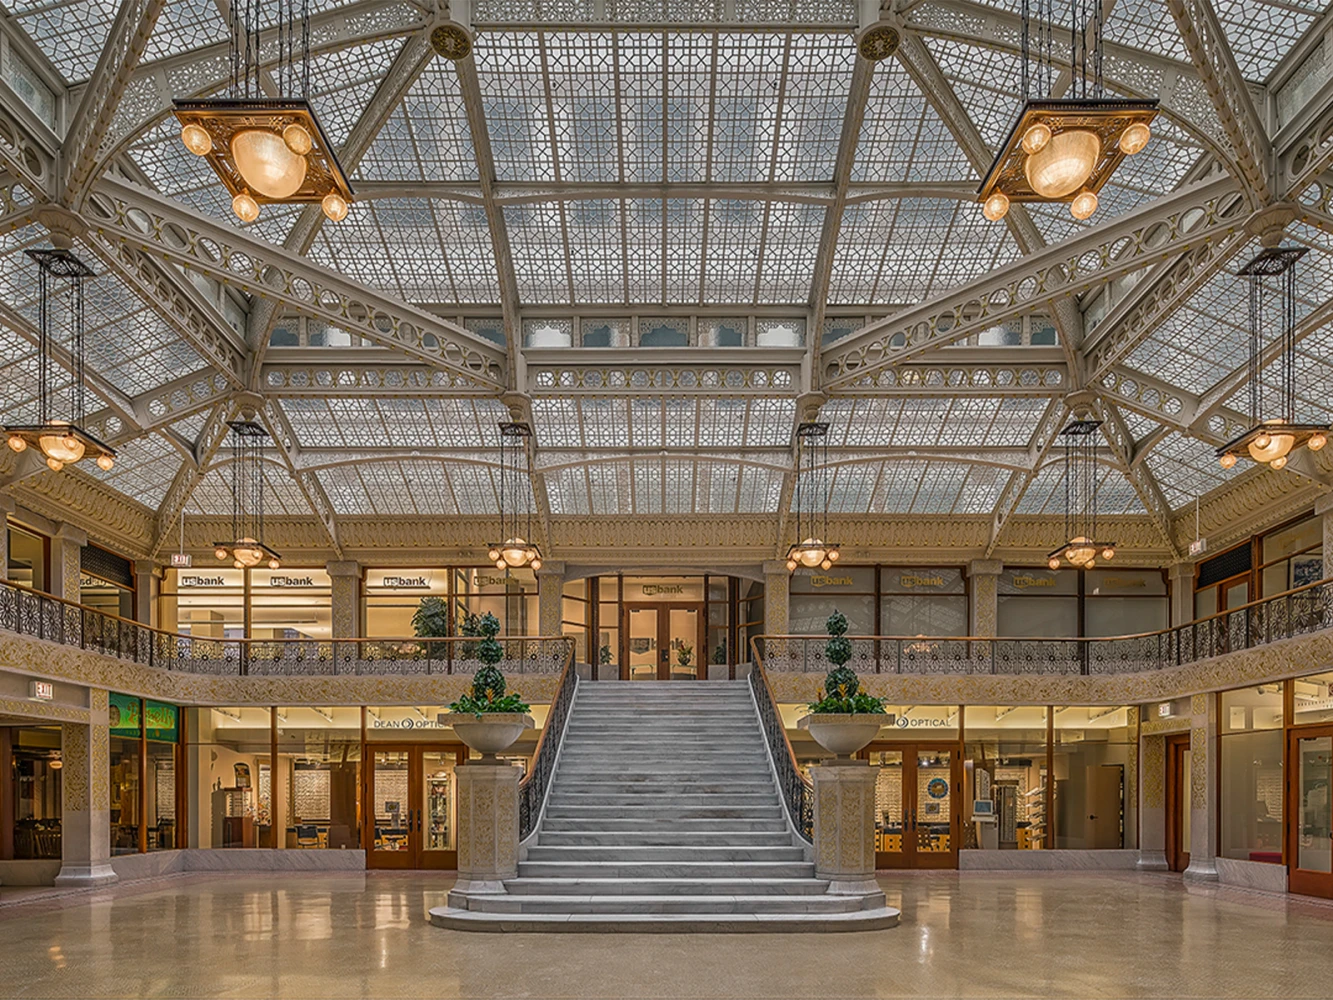 The Rookery Building Guided Tour: What to expect - 1